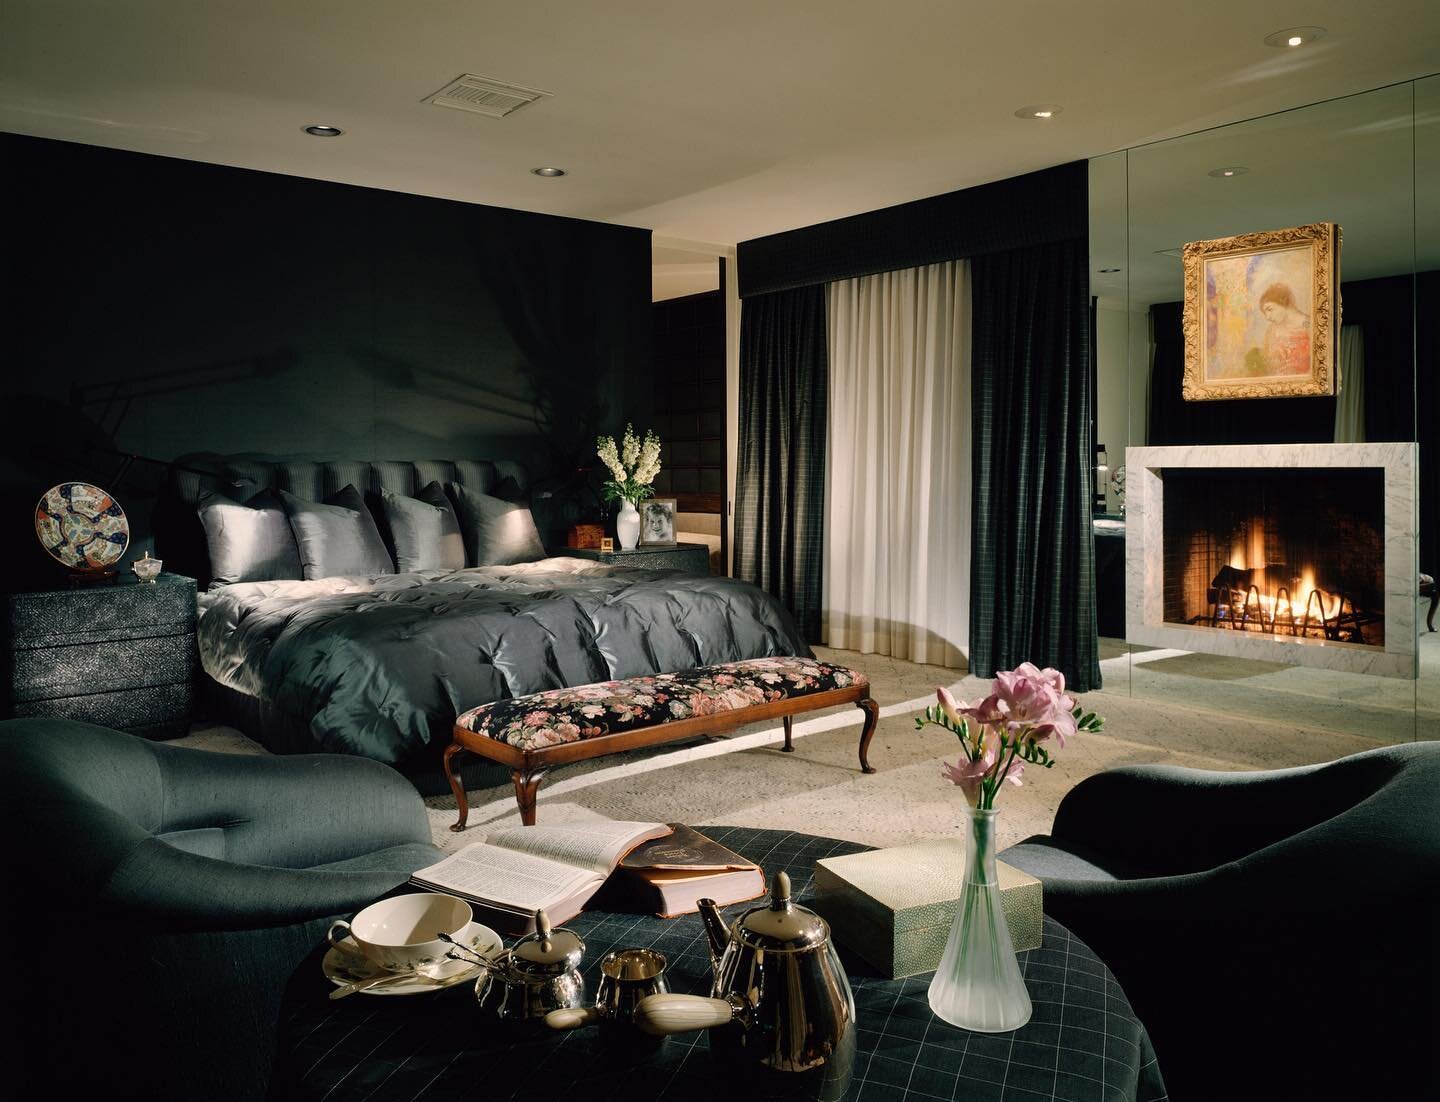 A black accent wall can seem like an unconventional choice, but I love them when they are used properly. Here the bedroom feels intimate and cozy while remaining elegant. Beautiful. 

#interiordesign #bedroomdesign #accentwall #blackandwhitedecor